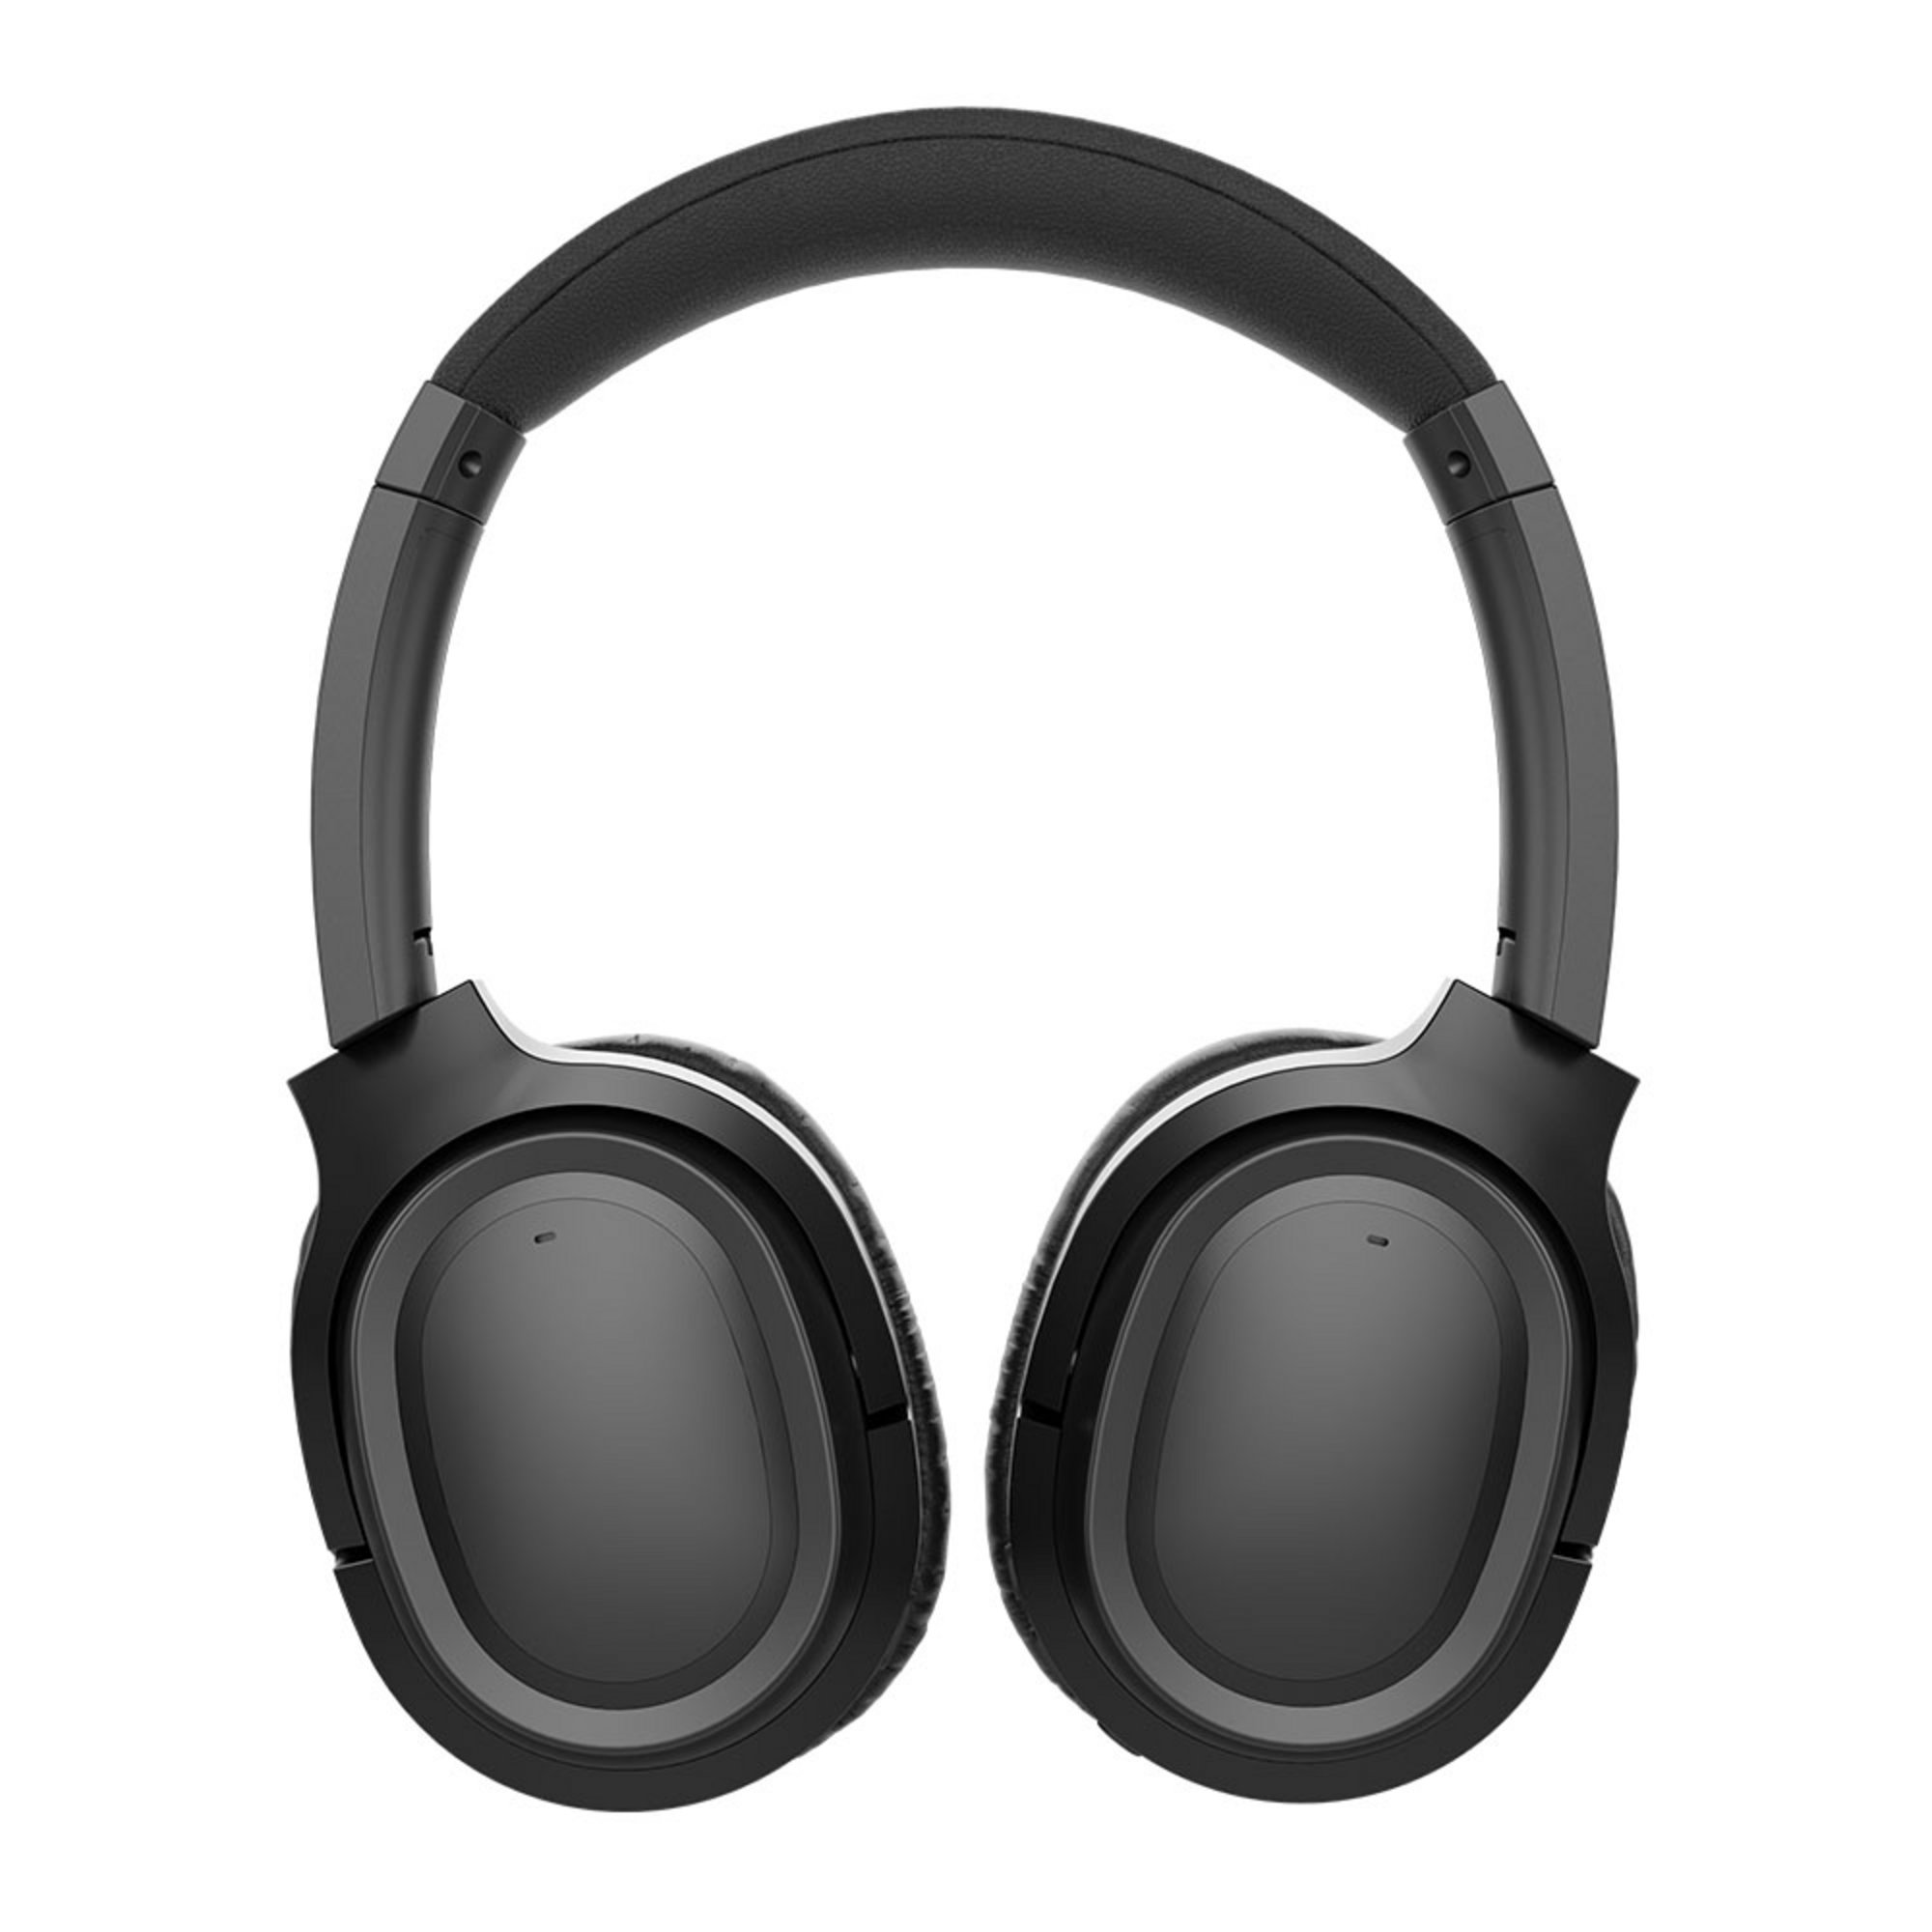 View more Engage 2 ANC Wireless Headphones Black details!!